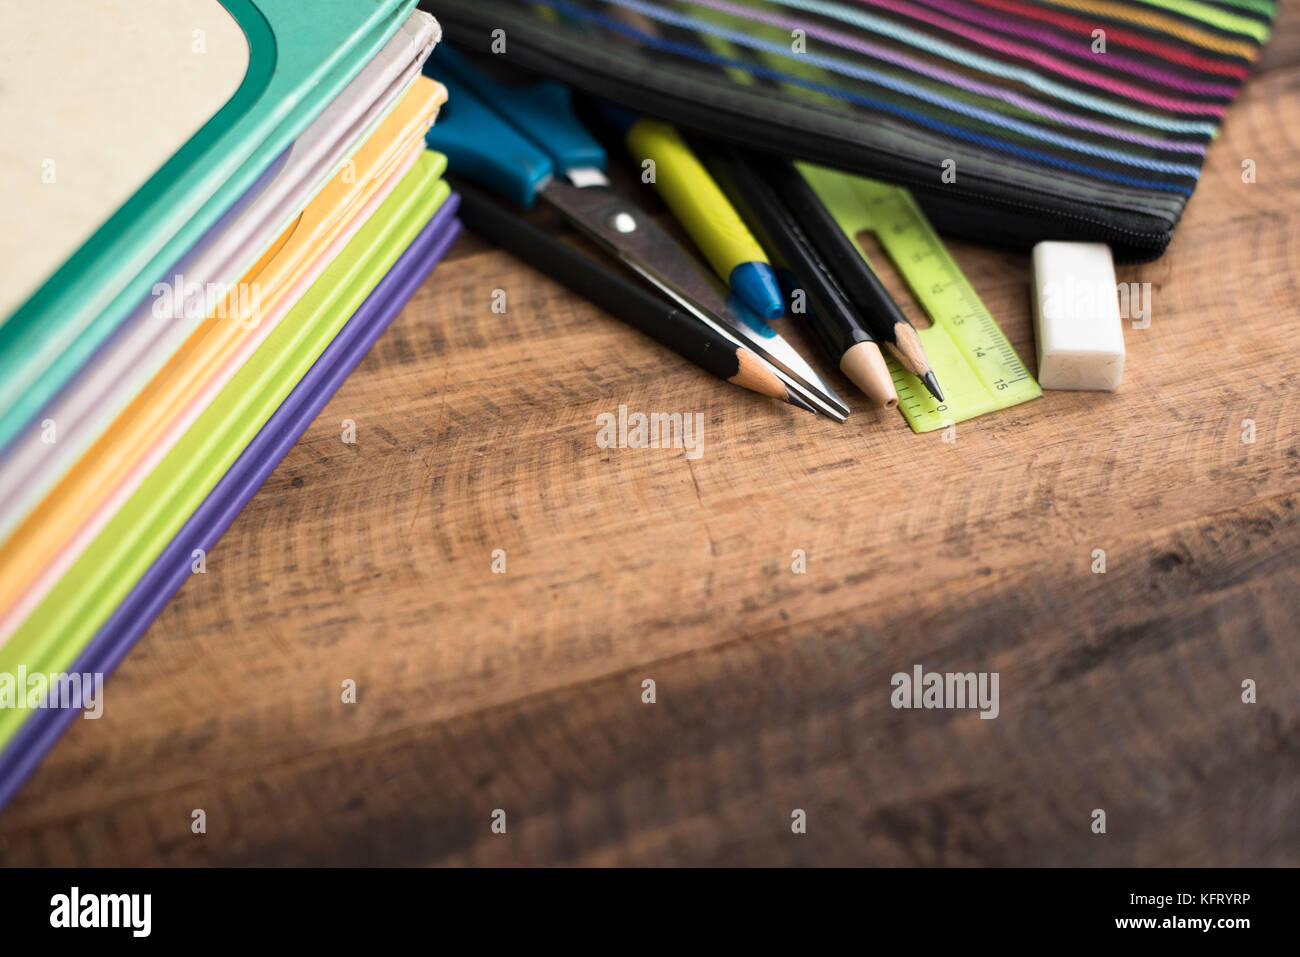 back to school concept - book,pen,ruler,eraser and pencil sharpener on a wooden table Stock Photo